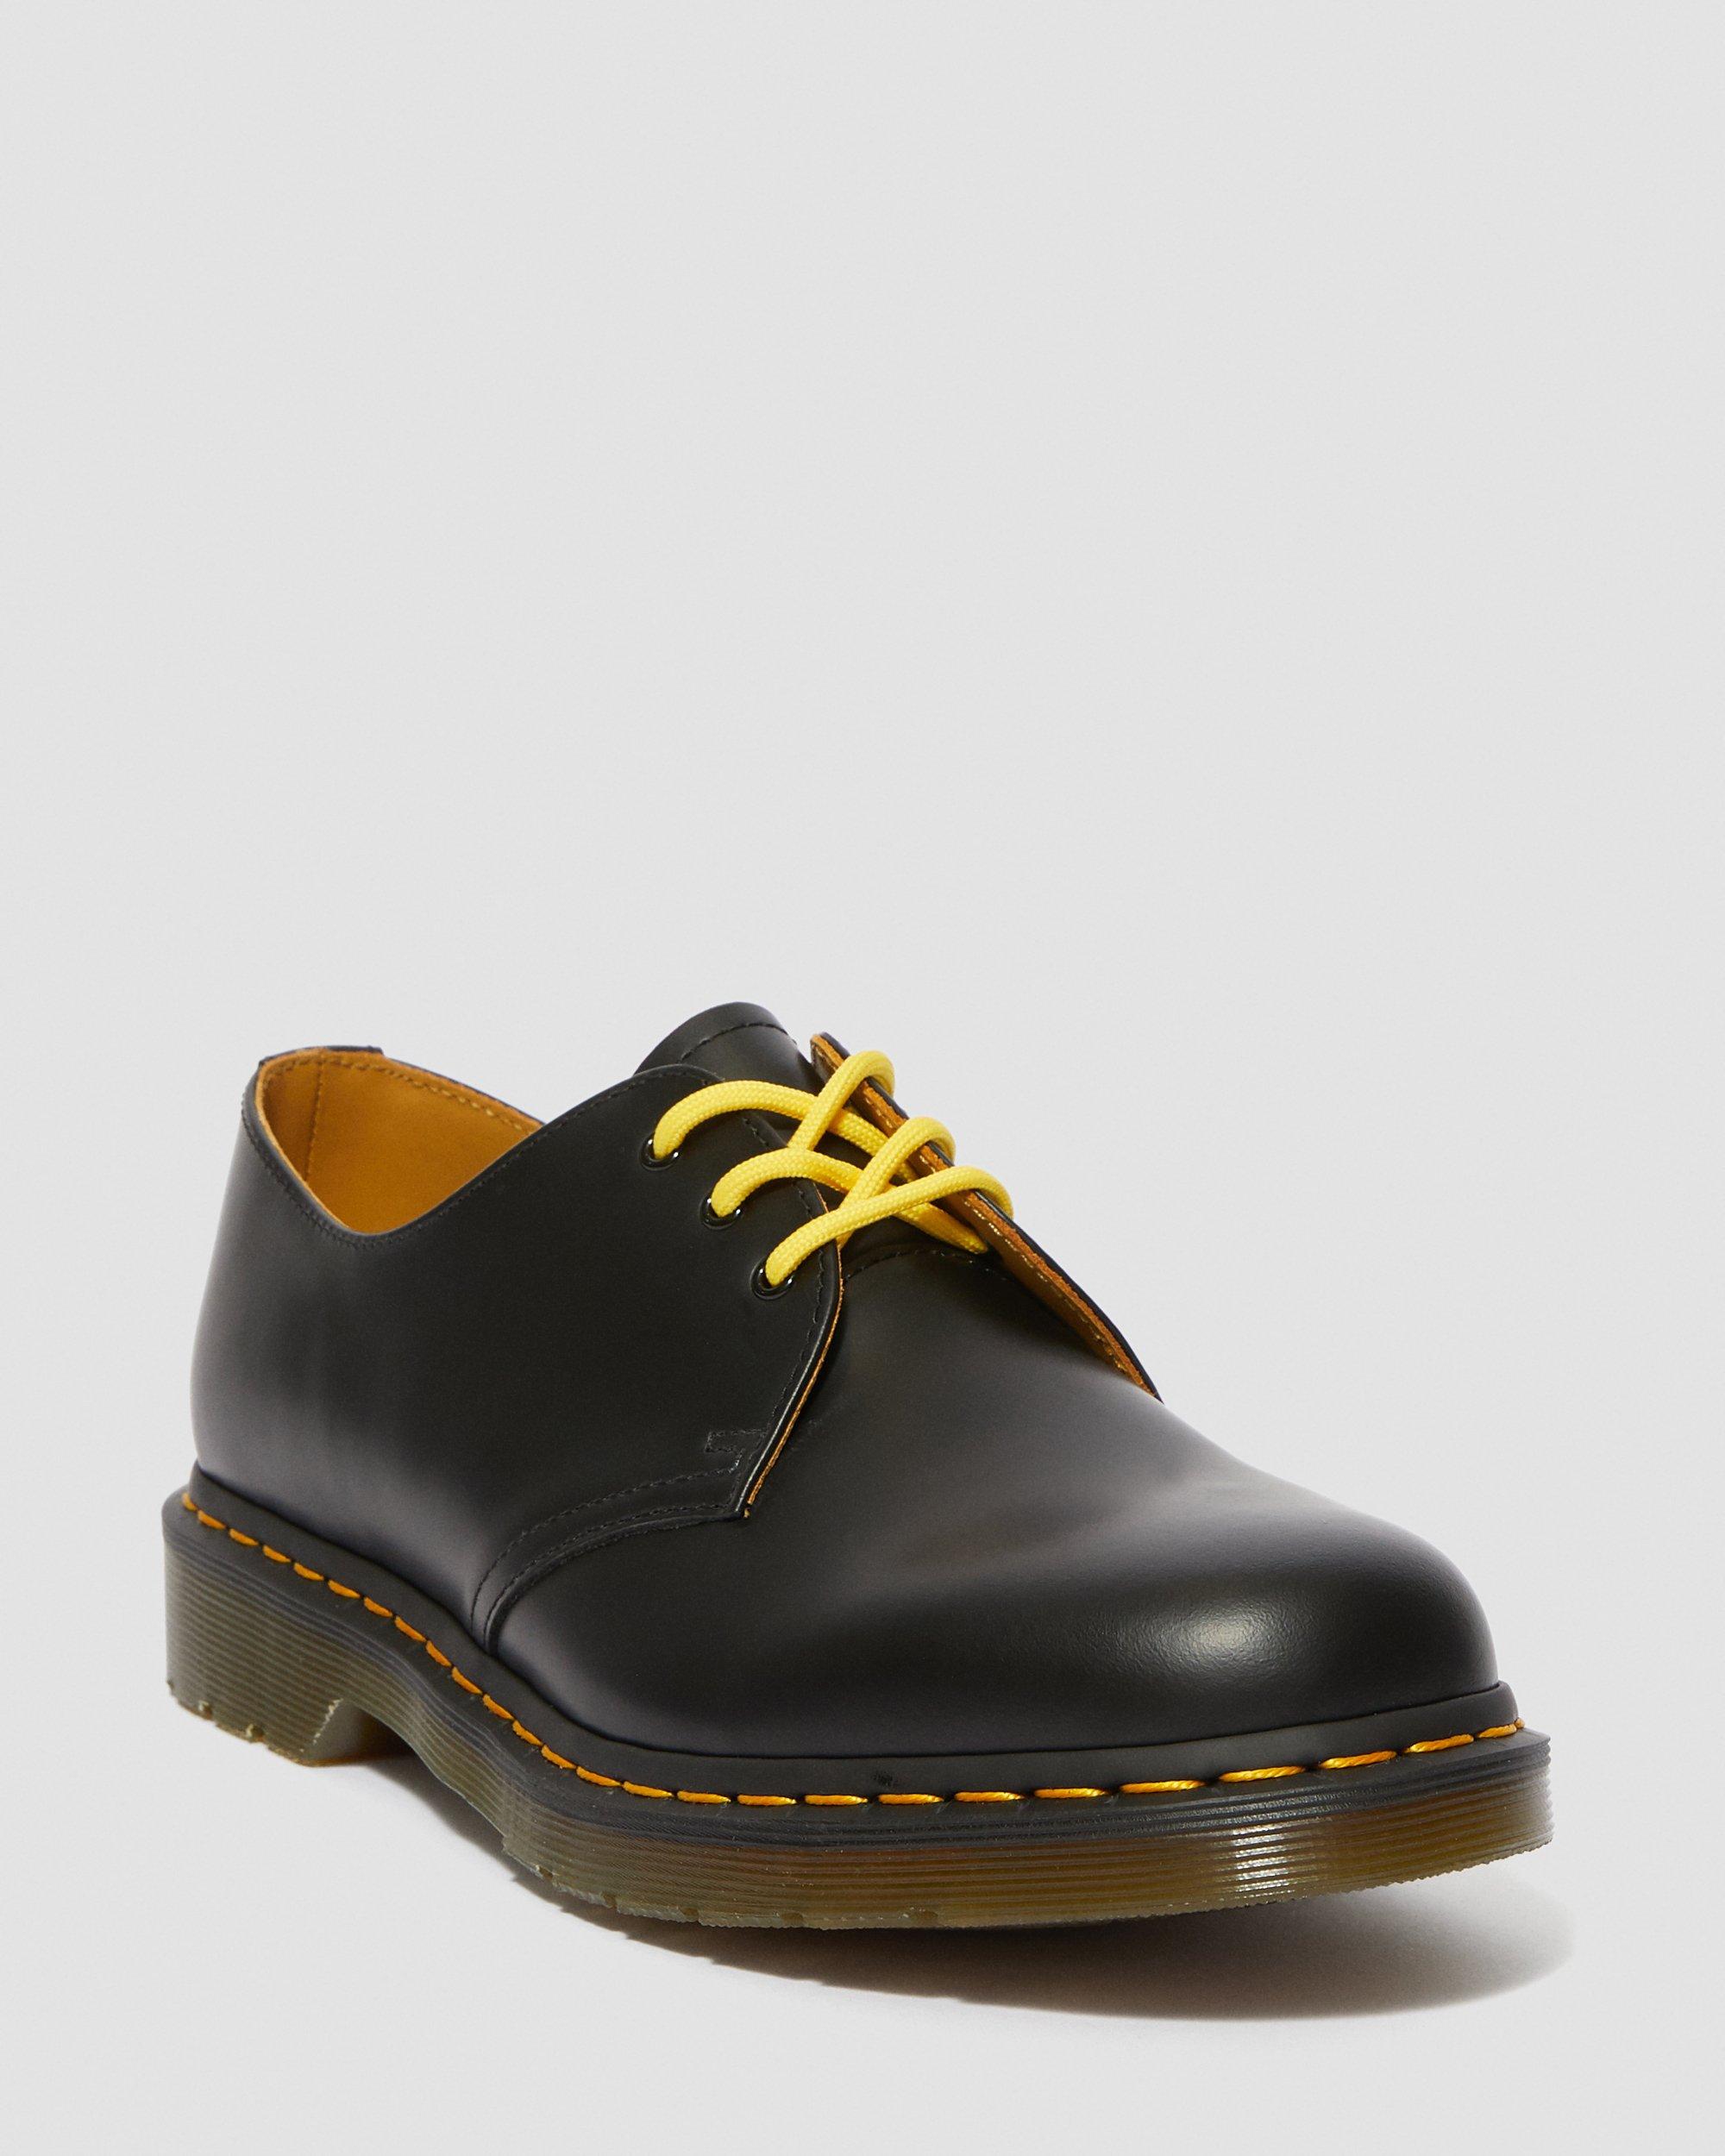 1461 Neighborhood Smooth Leather Oxford Shoes, Black | Dr. Martens